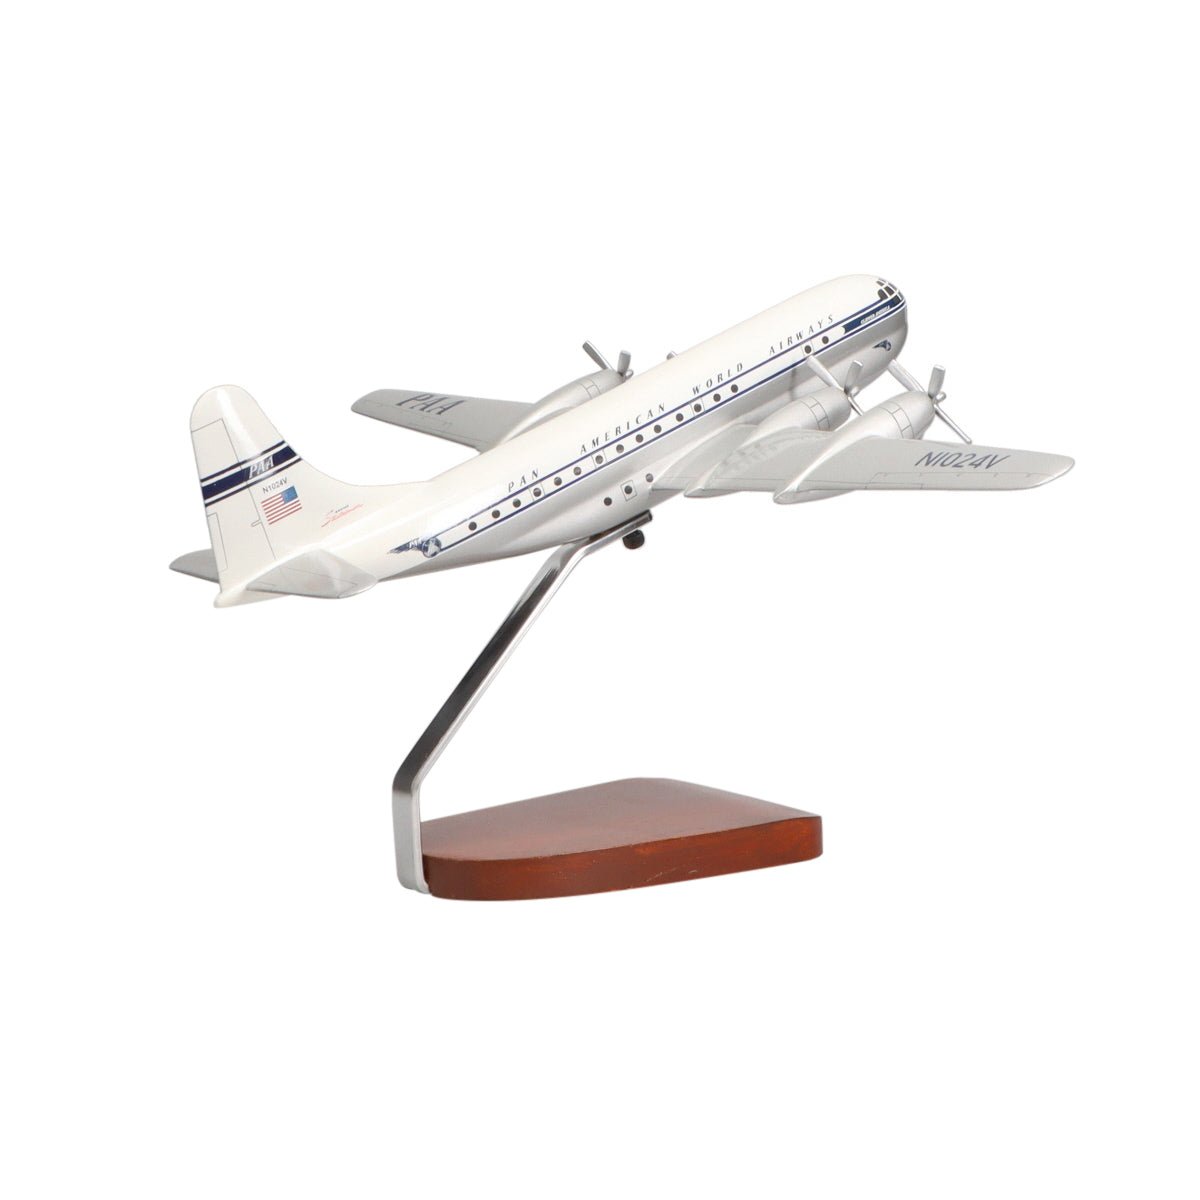 Boeing™ 377 Stratocruiser Pan Am Airways Limited Edition Large Mahogany Model - PilotMall.com